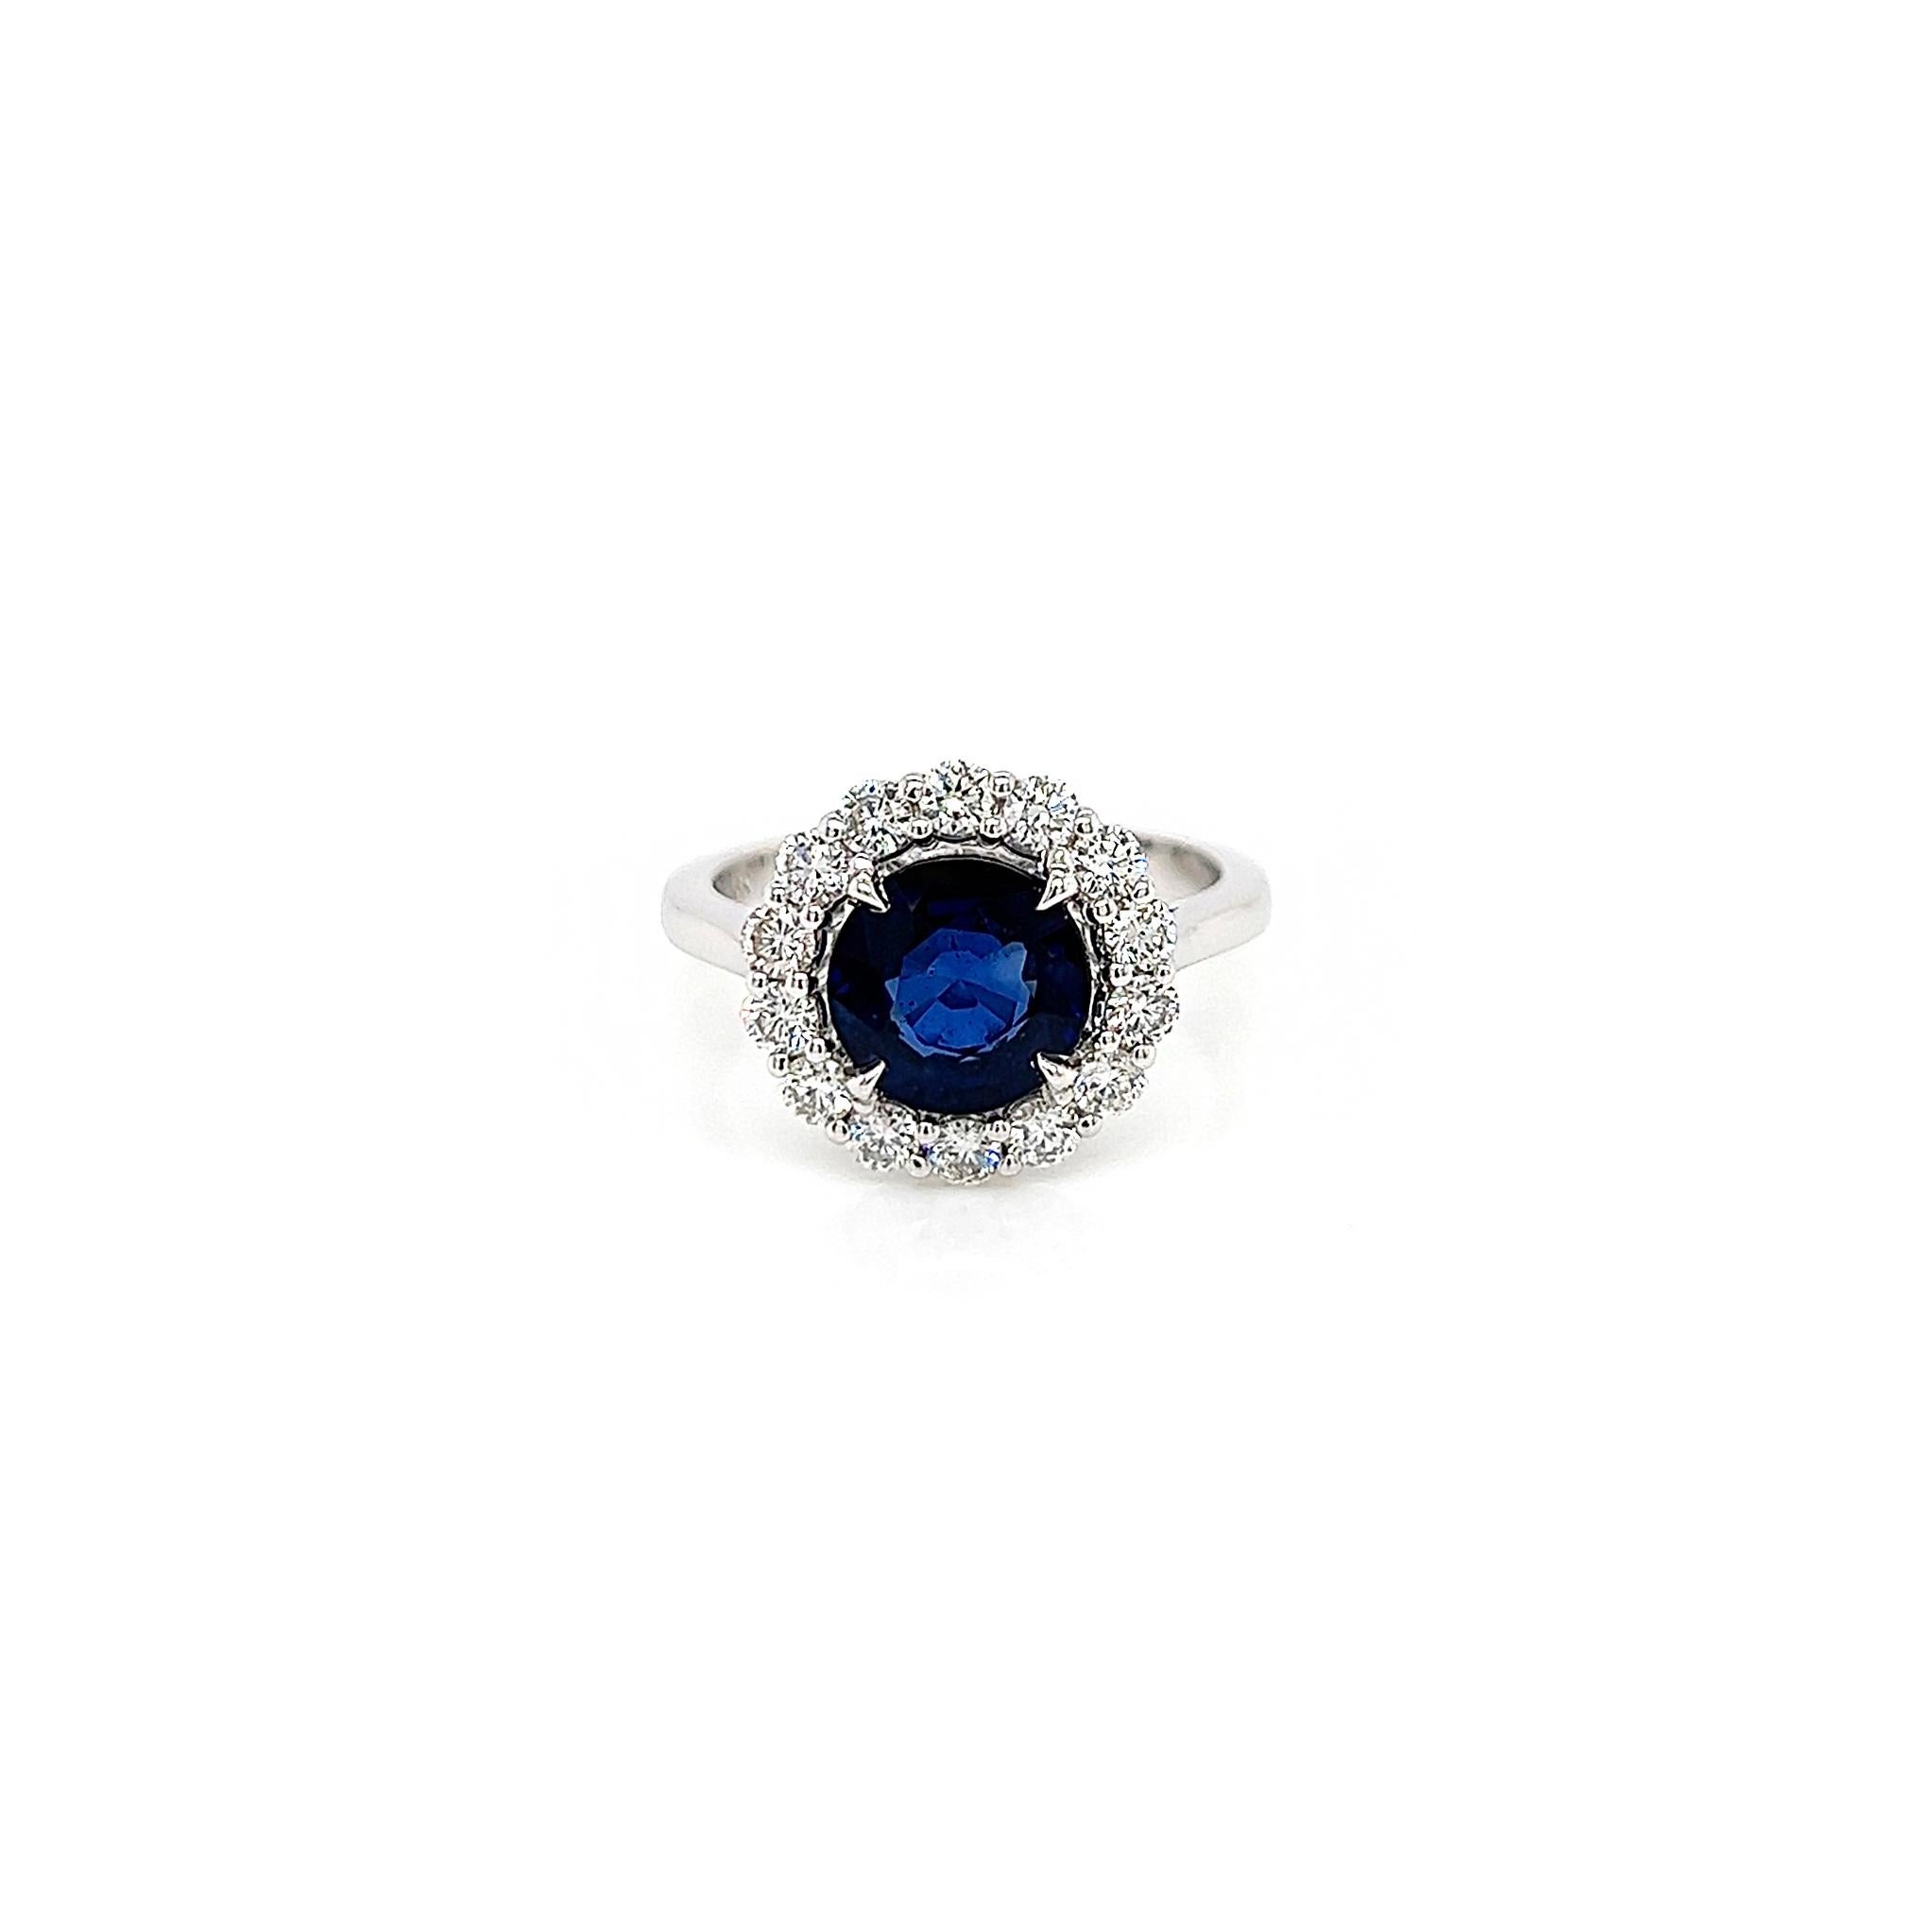 3.08 Total Carat Blue Round Sapphire and Diamond Halo Ladies Engagement Ring

-Metal Type: 18K White Gold
-2.38 Carat Round Cut Natural Blue Sapphire, Heat Treated
-0.70 Carat Round Natural side Diamonds. F-G Color, VS Clarity 

-Size 6.75

Made in